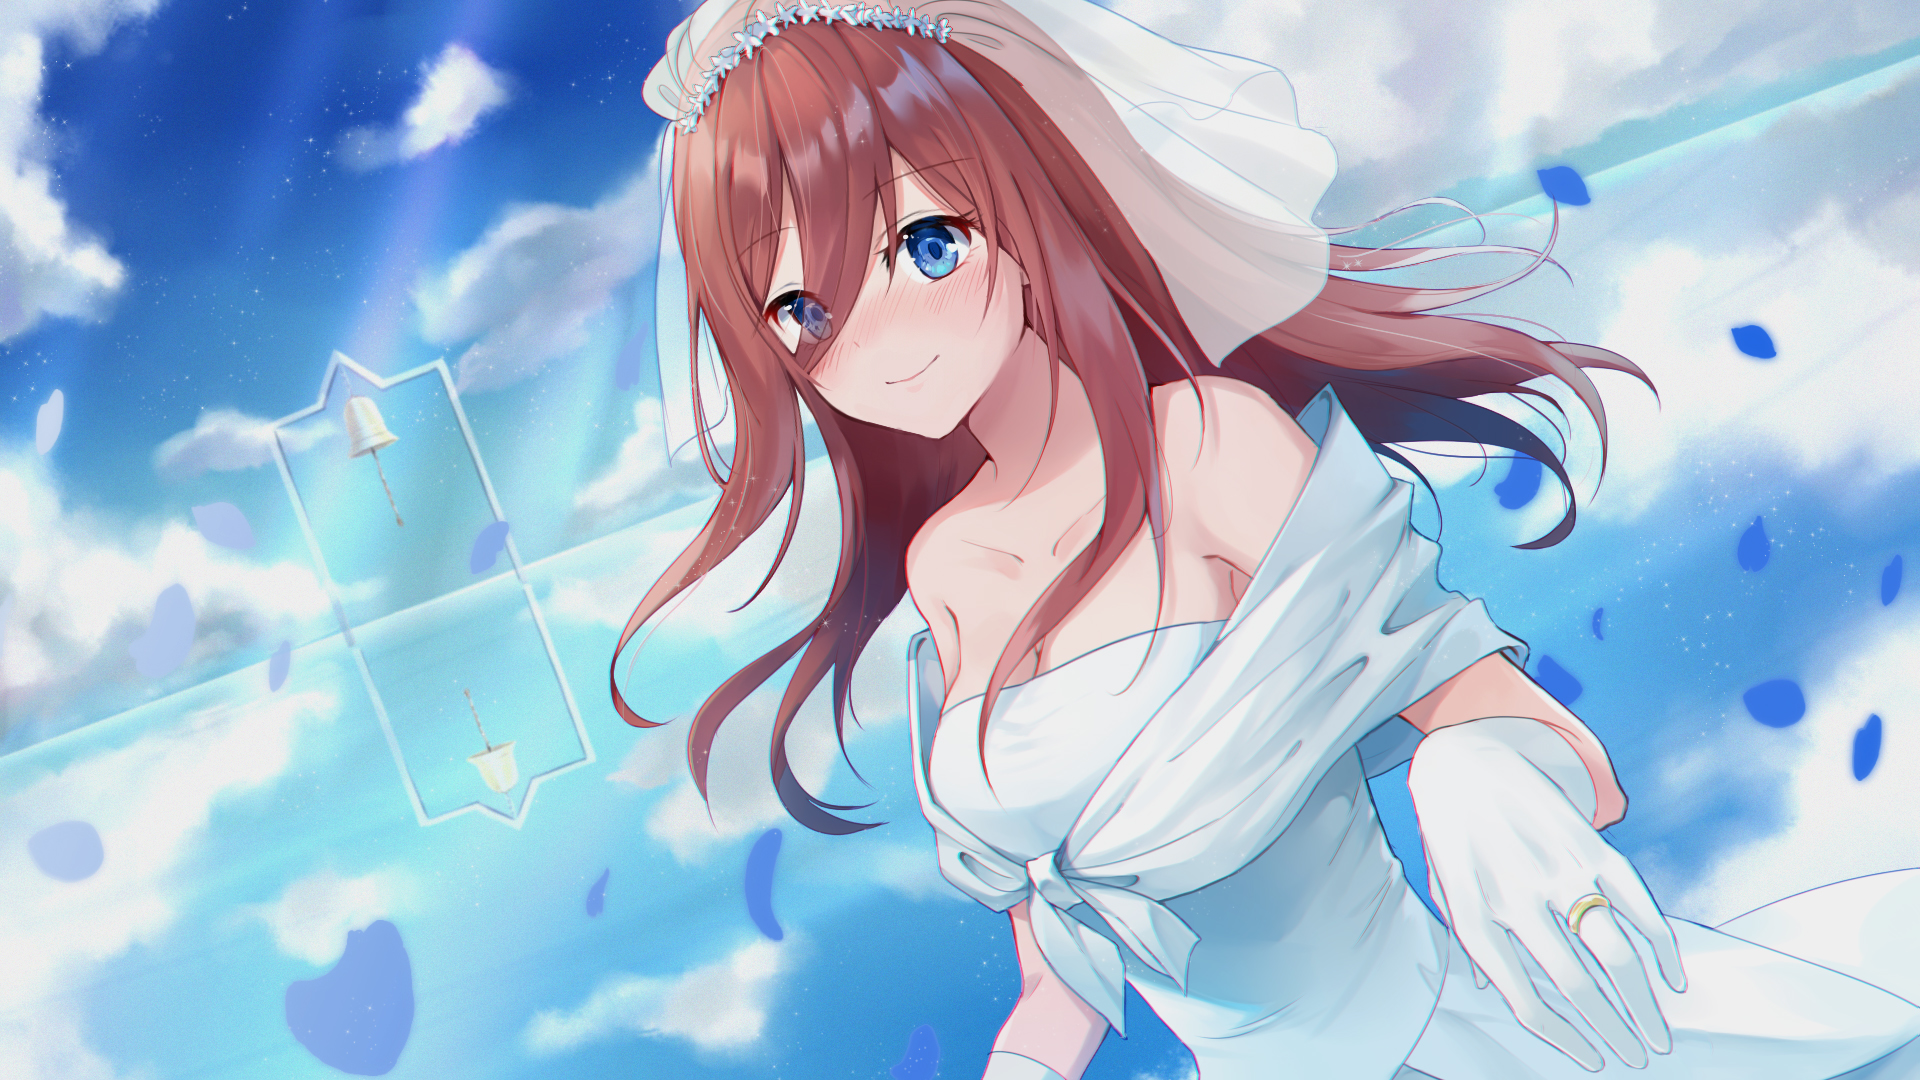 miku nakano, anime, the quintessential quintuplets, wedding dress wallpapers for tablet